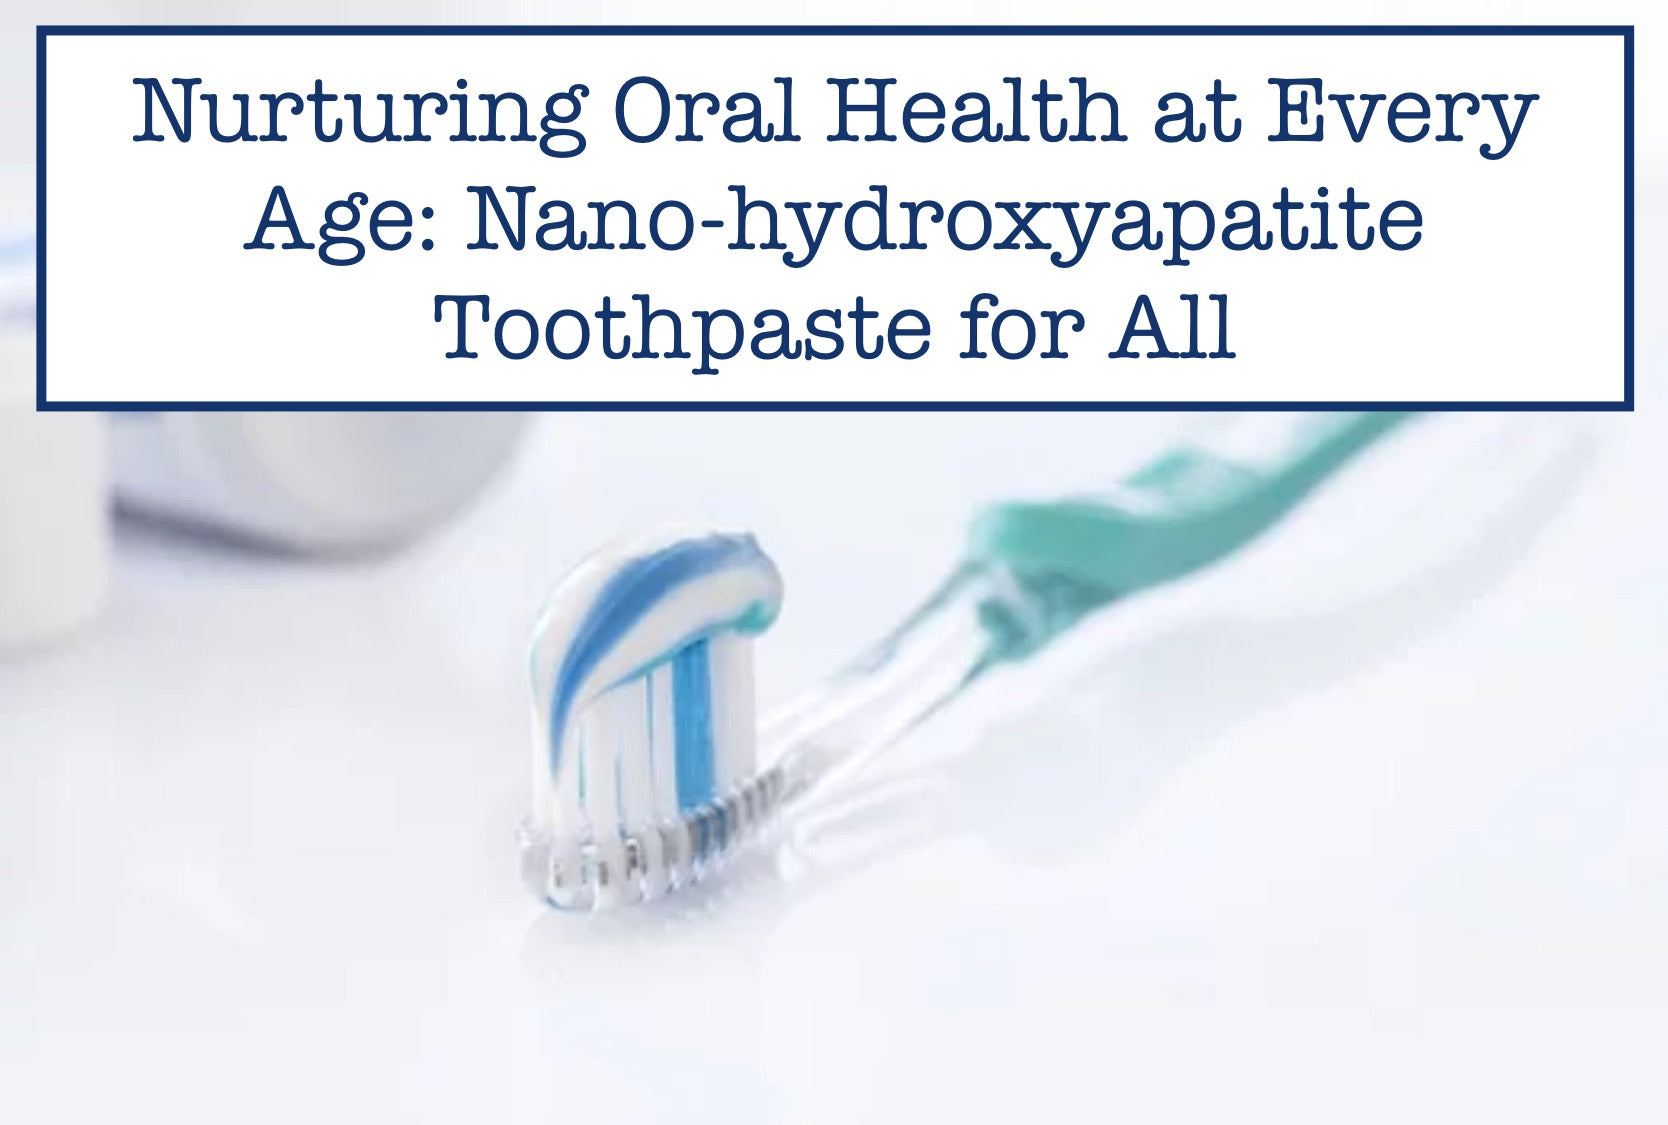 Nurturing Oral Health at Every Age: Nano-hydroxyapatite Toothpaste for All